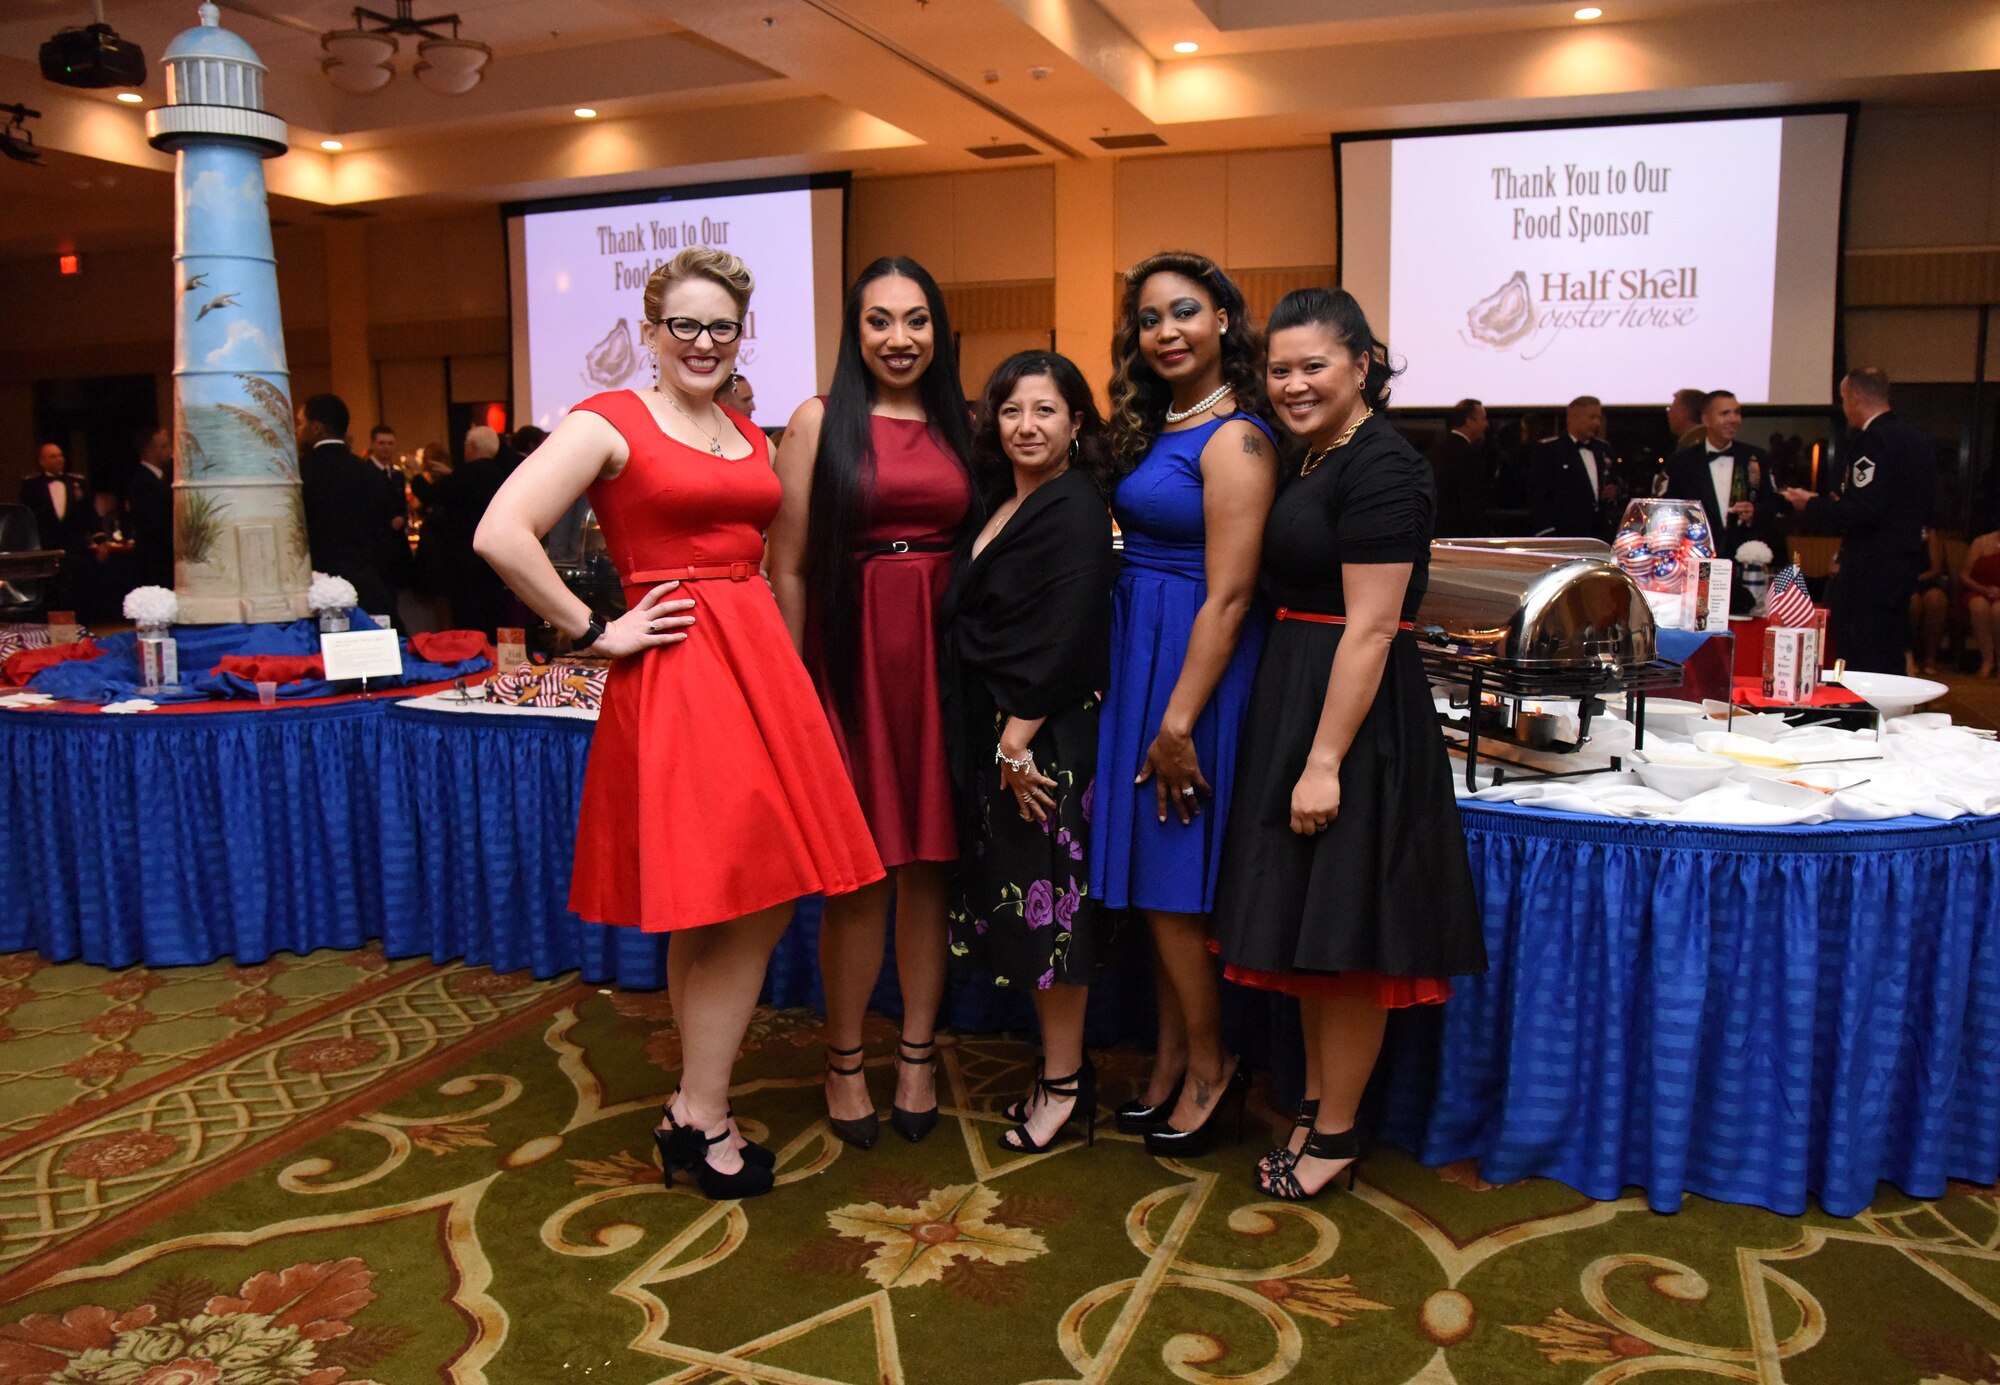 Keesler personnel pose for a photo wearing 1940s-1950s attire during the installation’s 75th Anniversary Gala at the Bay Breeze Event Center Nov. 4, 2016, on Keesler Air Force Base, Miss. The celebration commemorated Keesler’s 75 years of history with historical displays, throwback trivia, musical and dance performances and recognition of family members of Lt. Samuel Keesler, Jr. (U.S. Air Force photo by Kemberly Groue/Released)